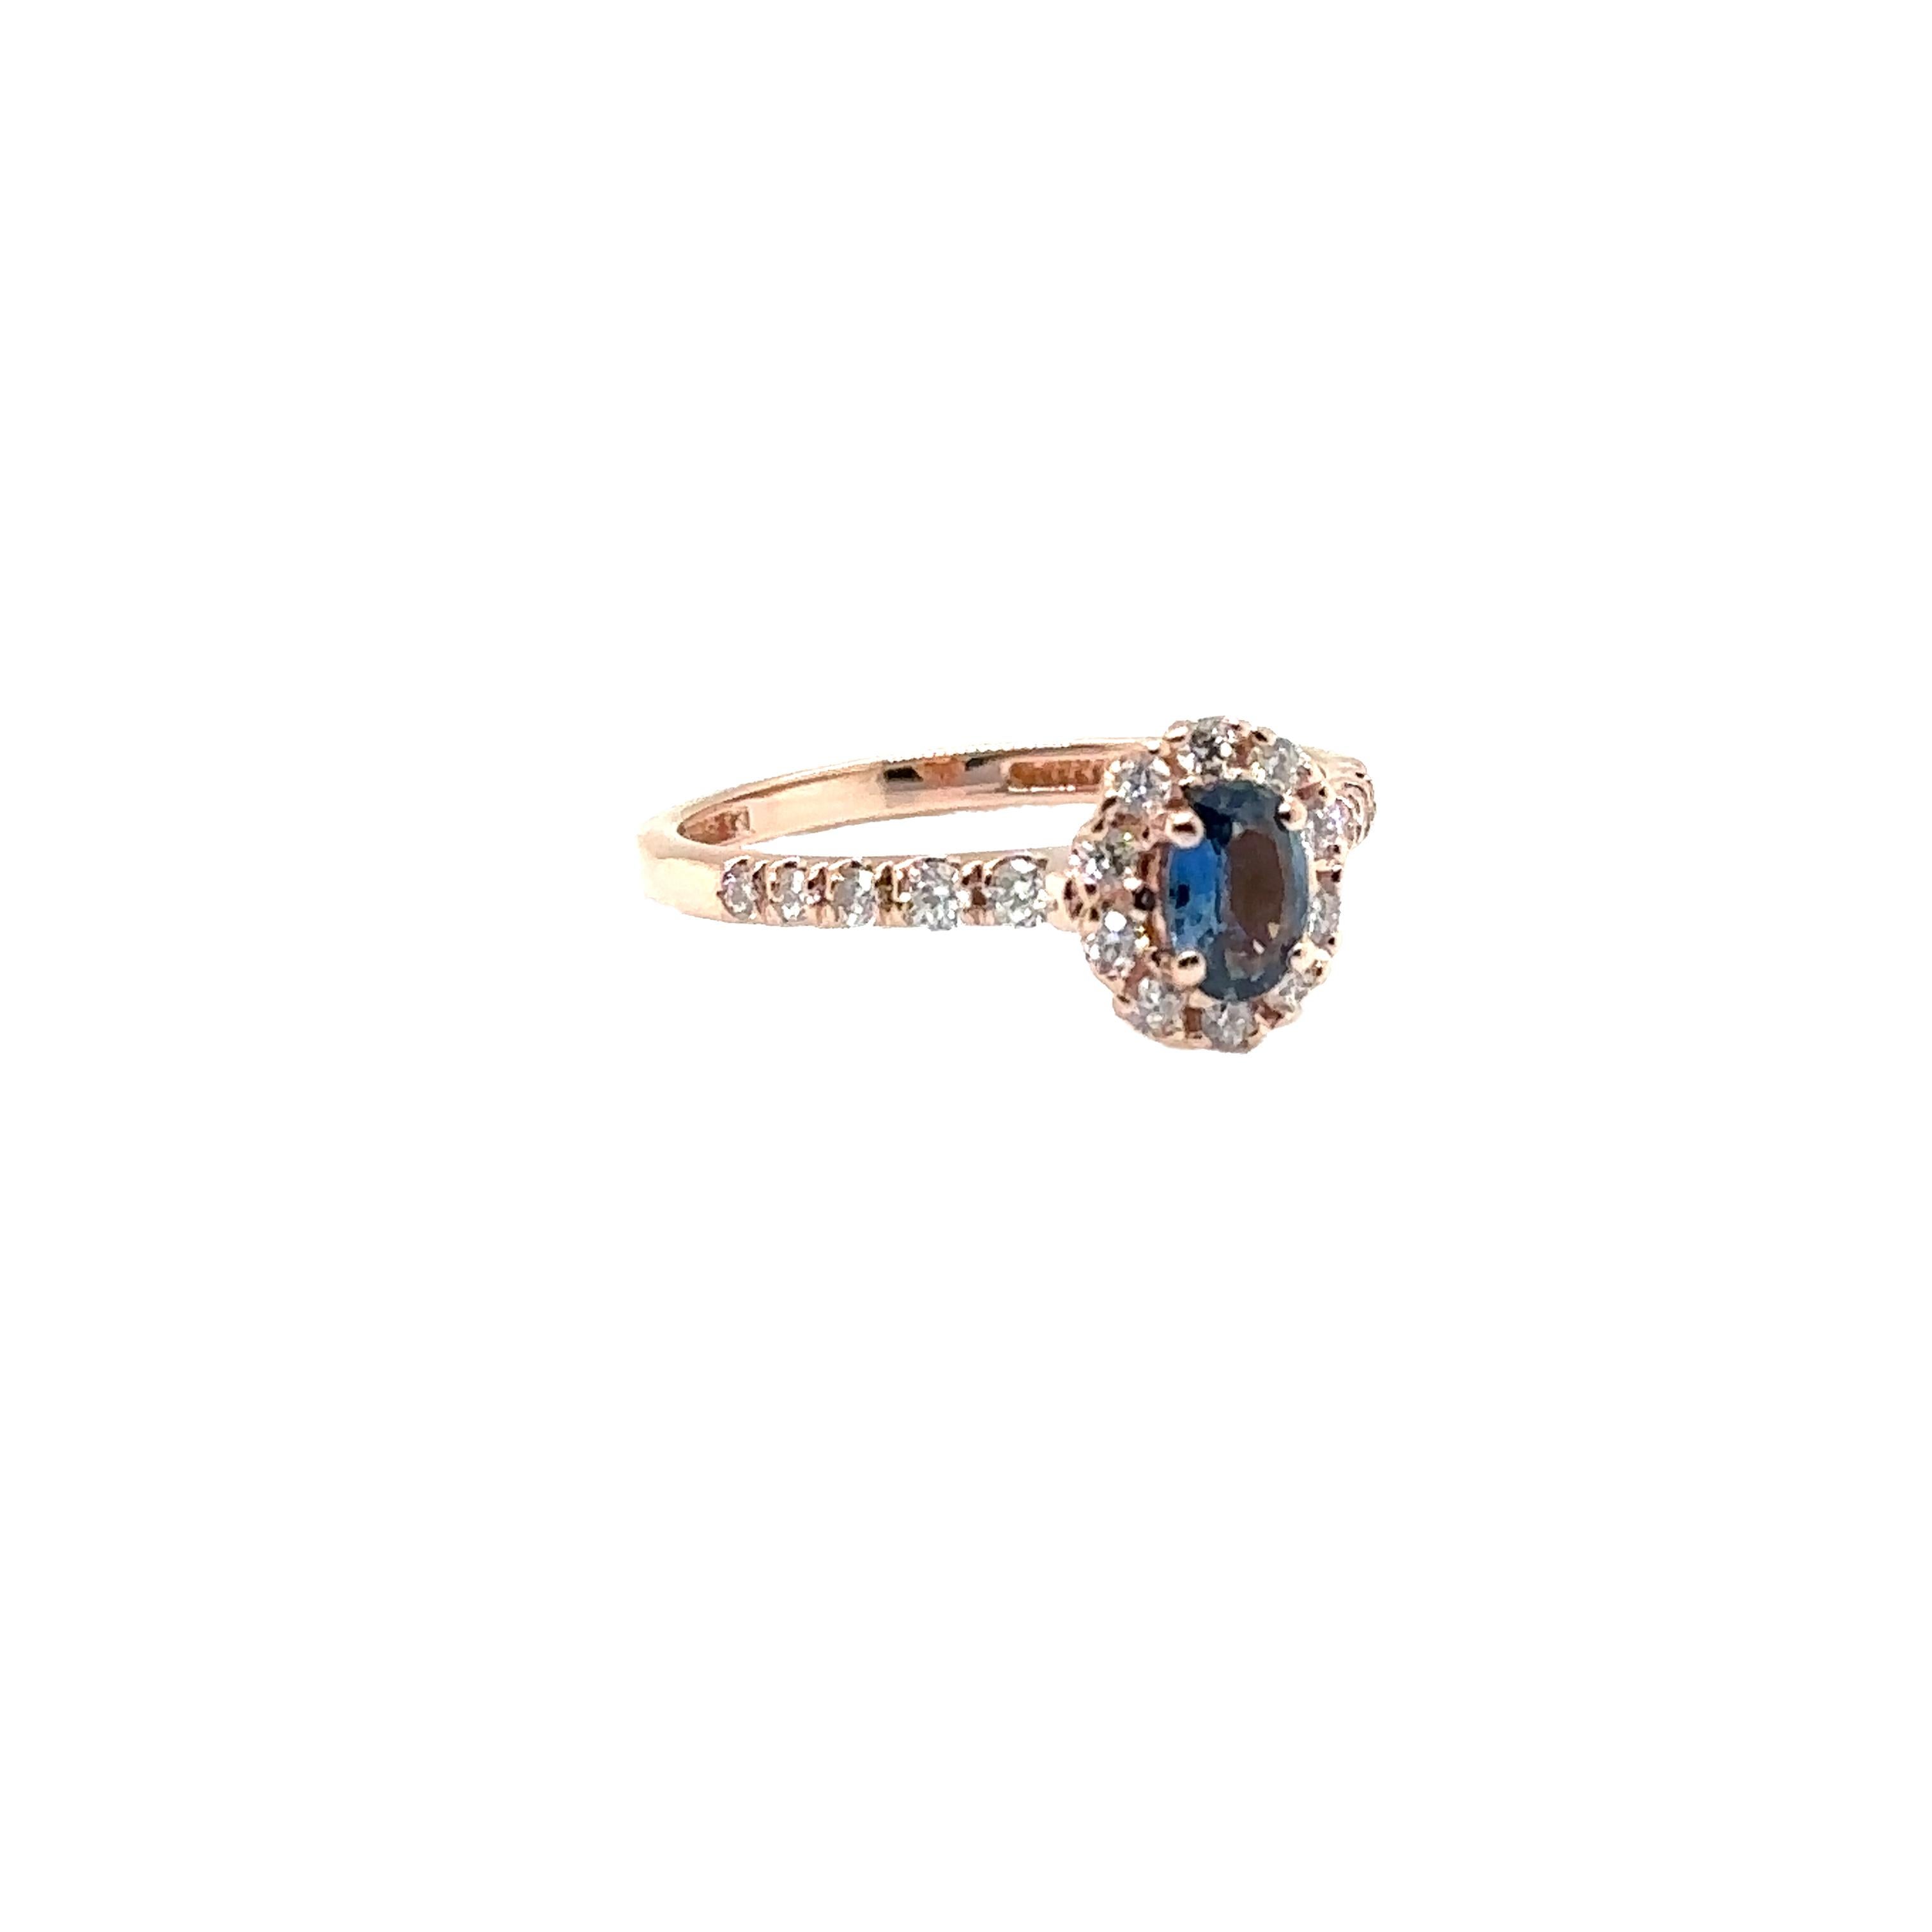 14K ROSE GOLD OVAL SAPPHIRE RING with DIAMONDS
Metal: 14K ROSE GOLD
Diamond Info: GH SI DIAMONDS 0.33CT
Stone Info: 6X4 OVAL SAPPHIRE 0.52CT
Total Dia Weight: 0.33 cwt.
Total Stone Weight: 0.52 cwt.
Item Weight: 2.20 gm
Ring Size: 8